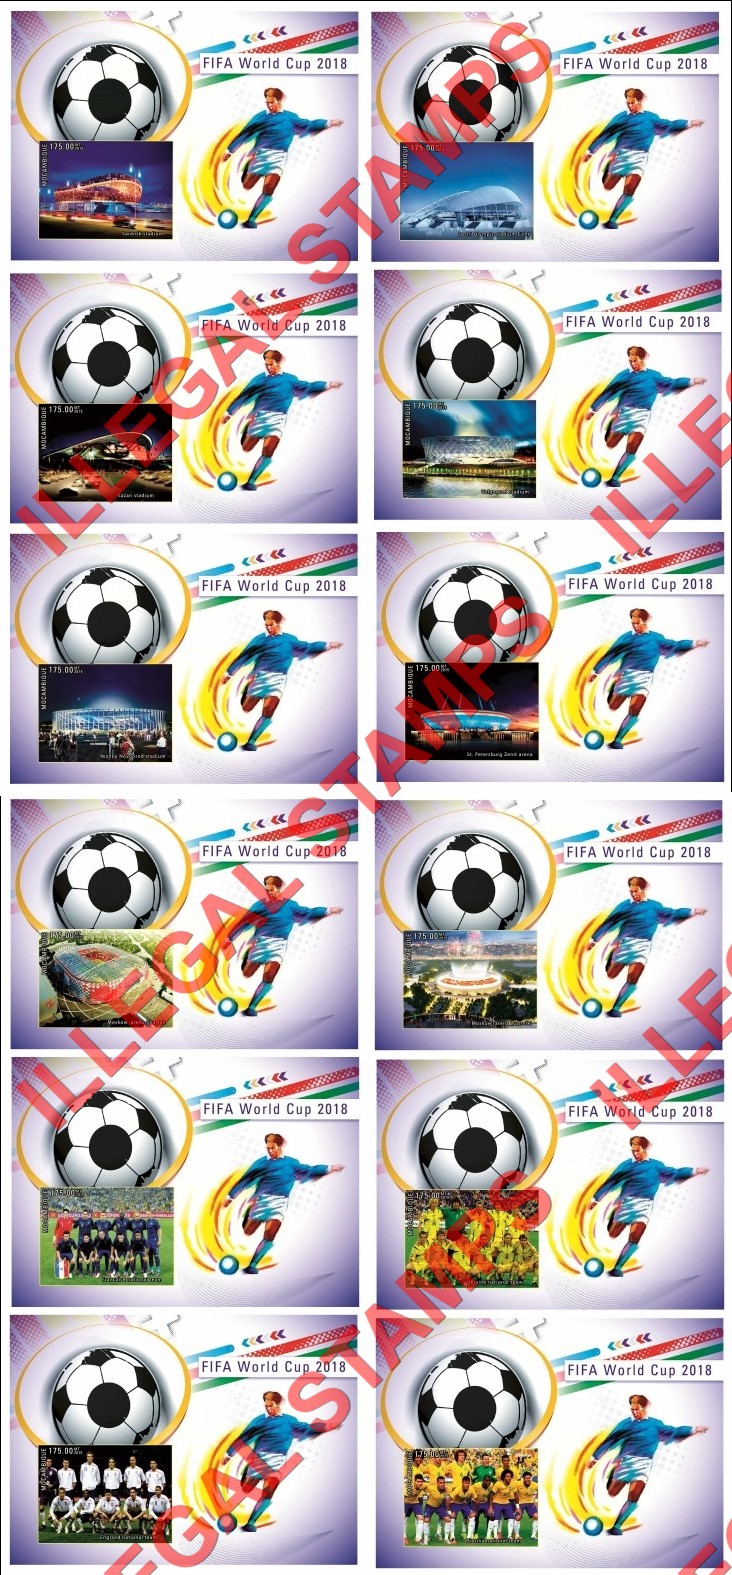  Mozambique 2015 FIFA World Cup Soccer in 2018 Counterfeit Illegal Stamp Souvenir Sheets of 1 (Part 2)